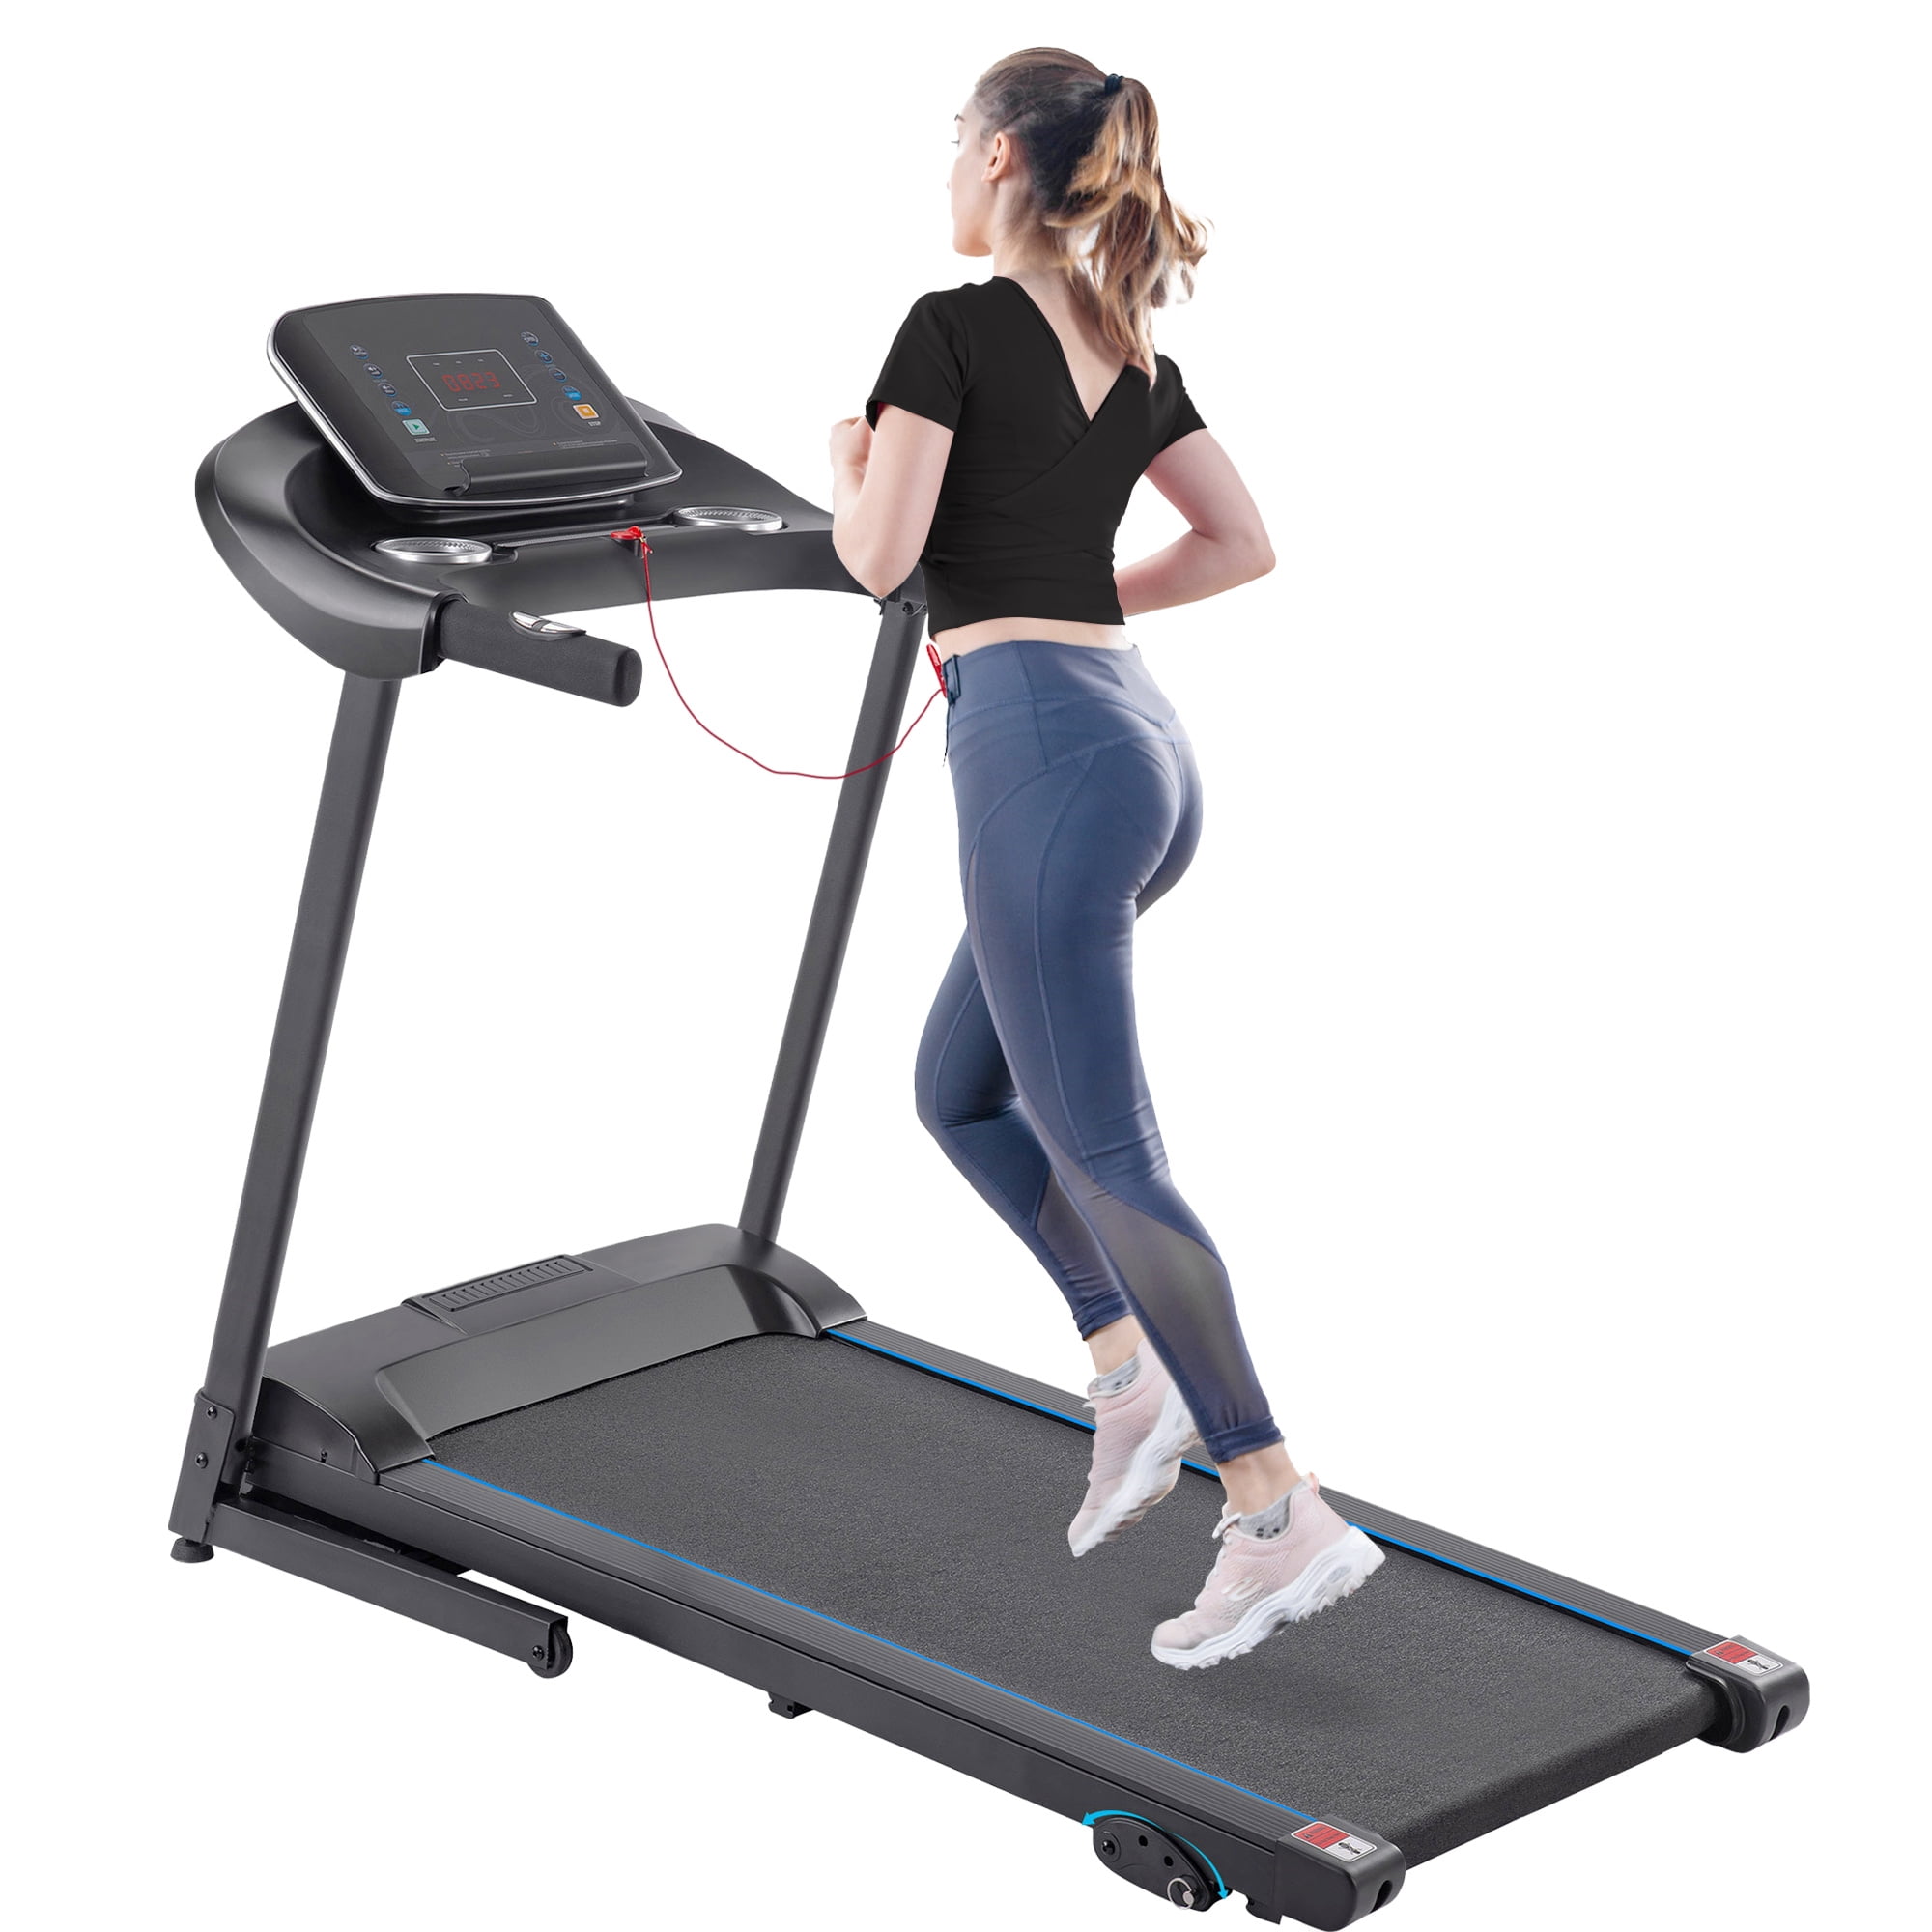 Treadmills for Home 300 lbs Weight Capacity Automatic Incline Electric Motorized Folding with Pulse Sensor,Bluetooth LED Display 